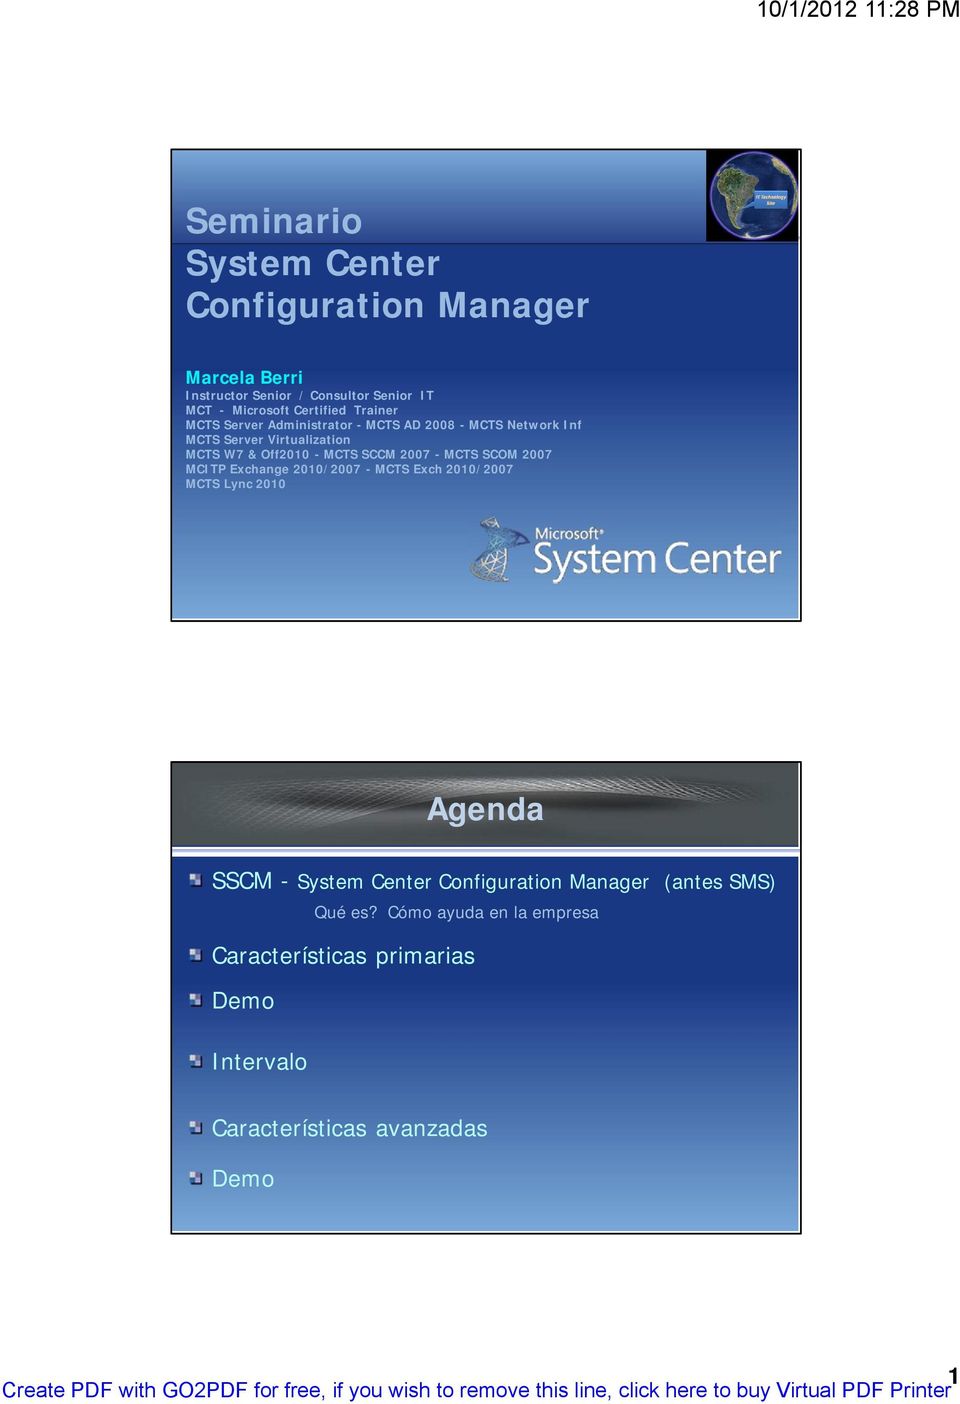 2007 - MCTS SCOM 2007 MCITP Exchange 2010/2007 - MCTS Exch 2010/2007 MCTS Lync 2010 Agenda SSCM - System Center Configuration